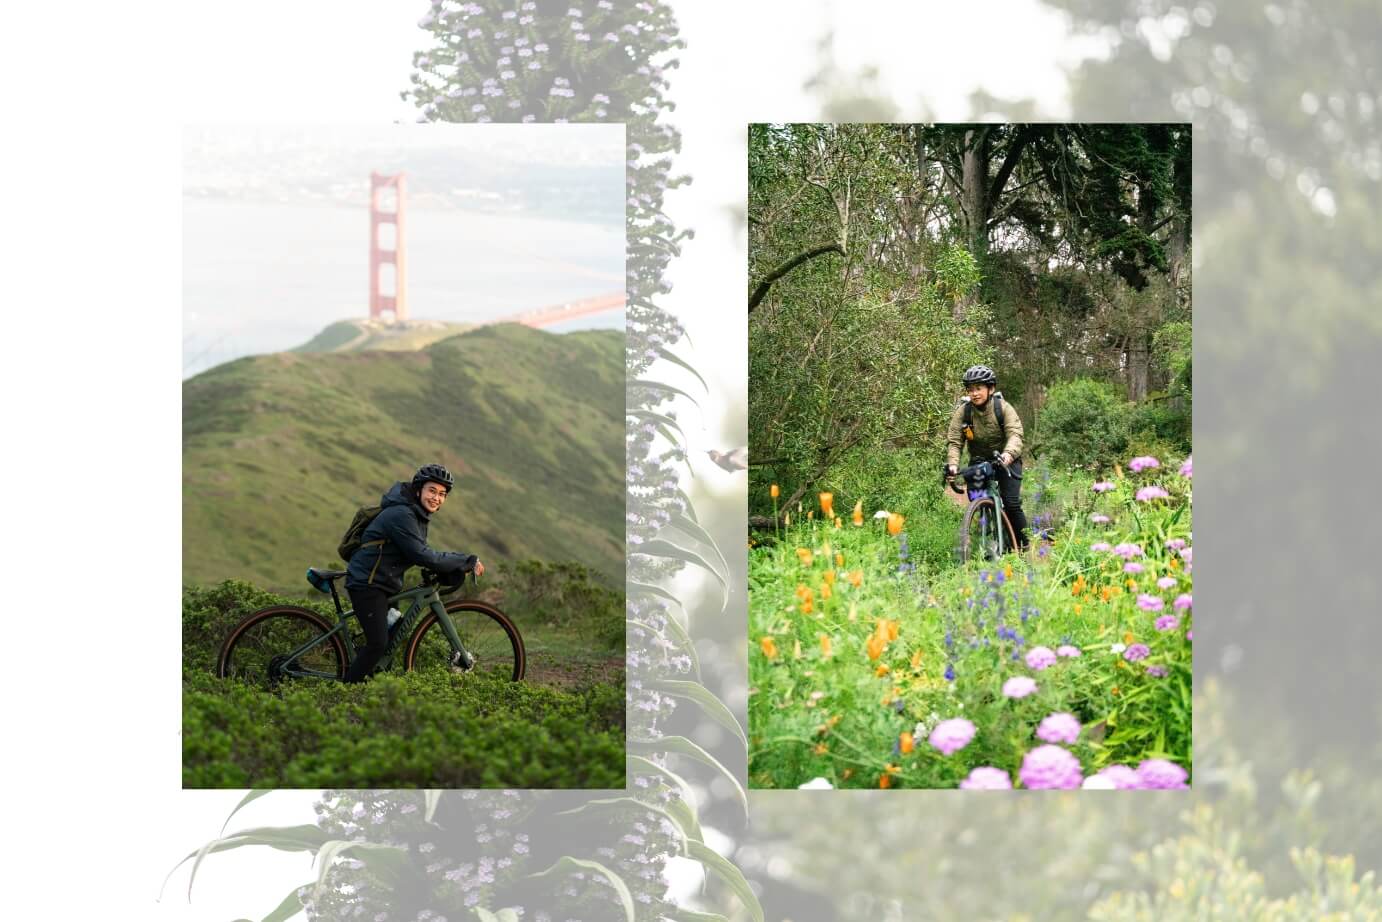 Artisitic photo collage of Mary Tolosa riding her bike through various nature landscapes around san francisco